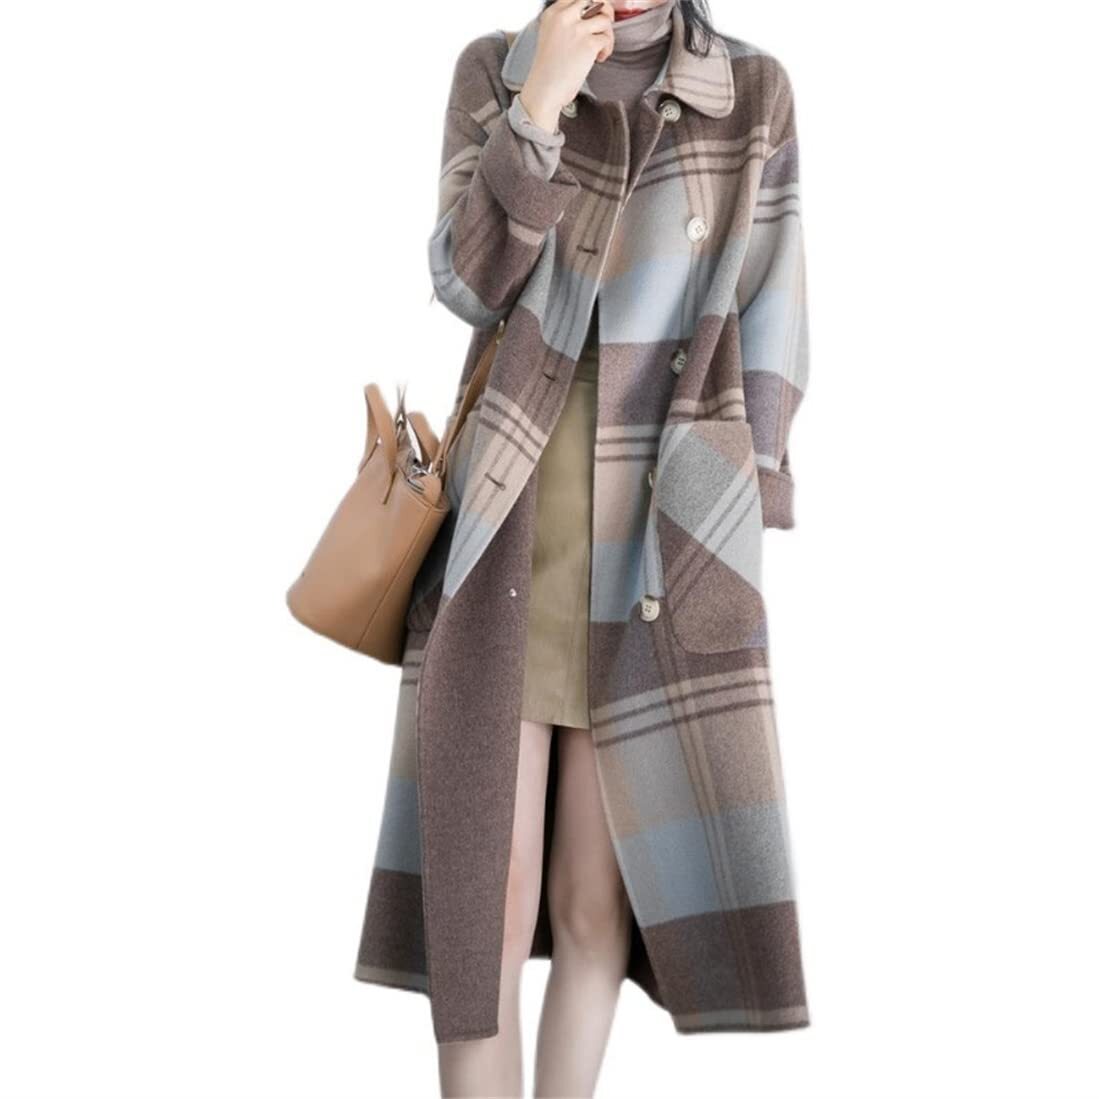 [YUANYUAN] lady's Chesterfield coat coat outer long coat long outer trench coat Korea manner check pattern long height .